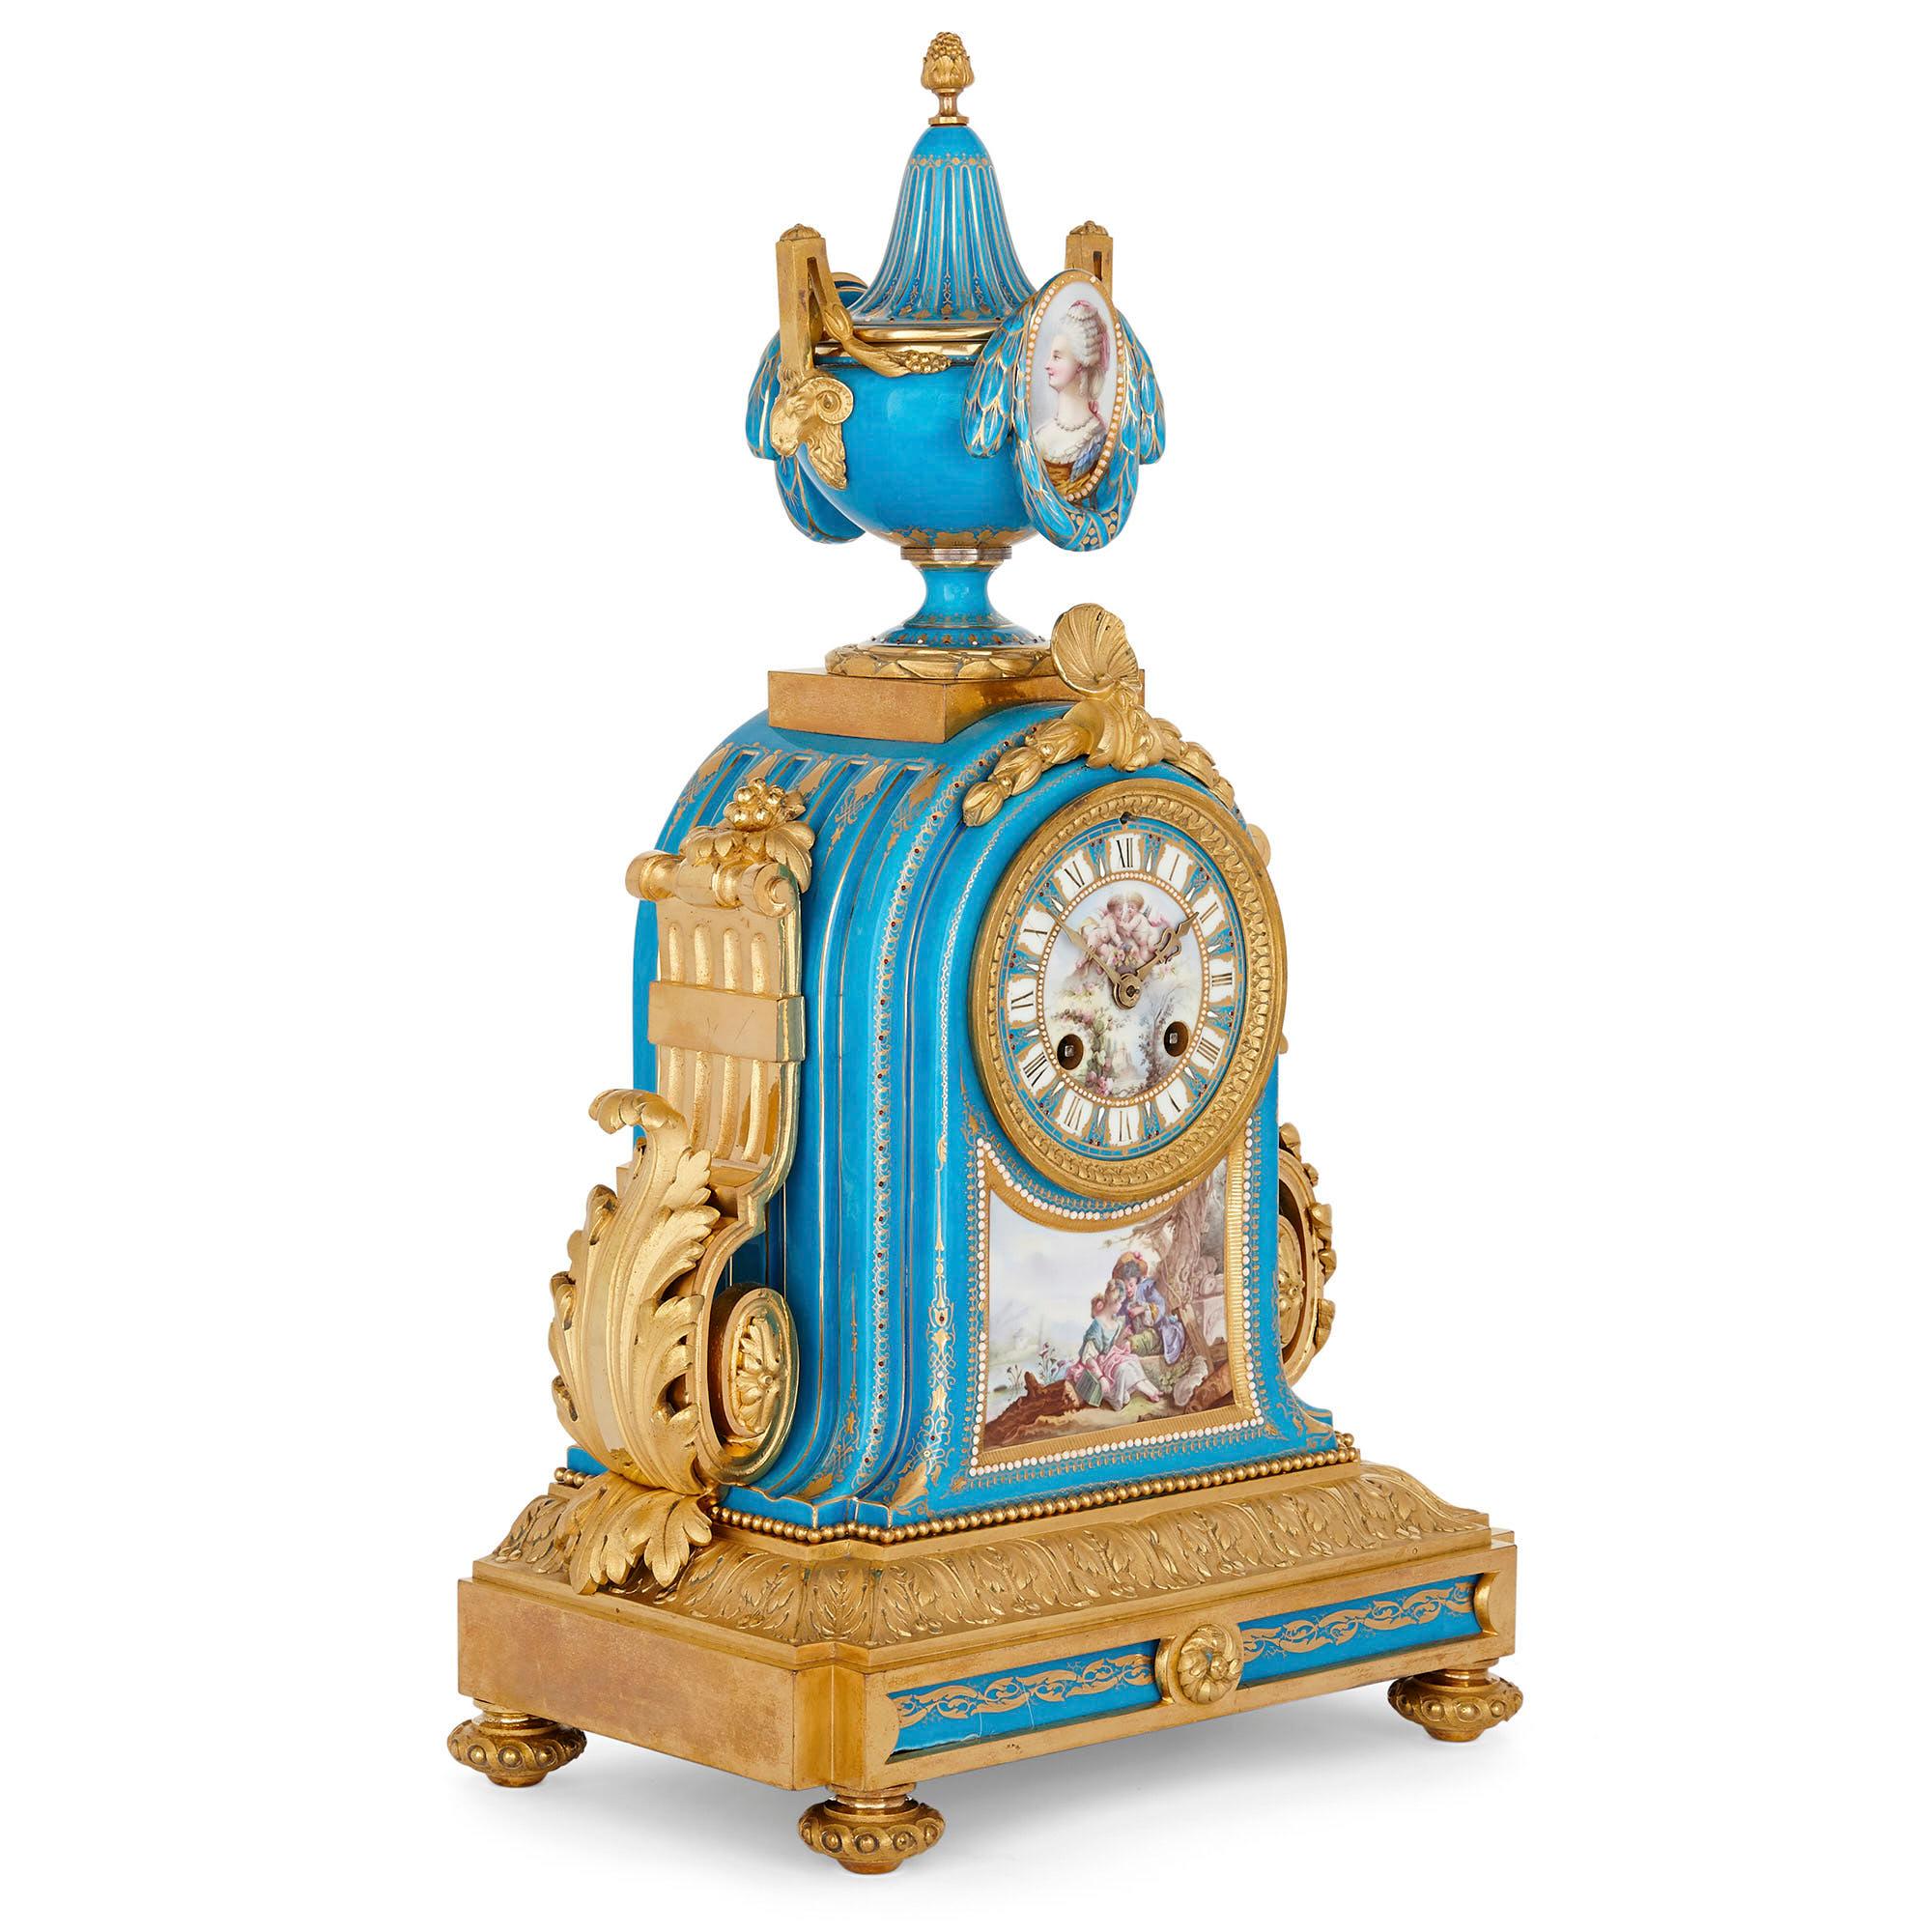 Louis XV style gilt bronze mounted porcelain mantel clock
French, late 19th century
Measures: Height 46cm, width 26cm, depth 17cm

This stunning Rococo style mantel clock features a parcel gilt porcelain and gilt bronze body. Raised on a flared